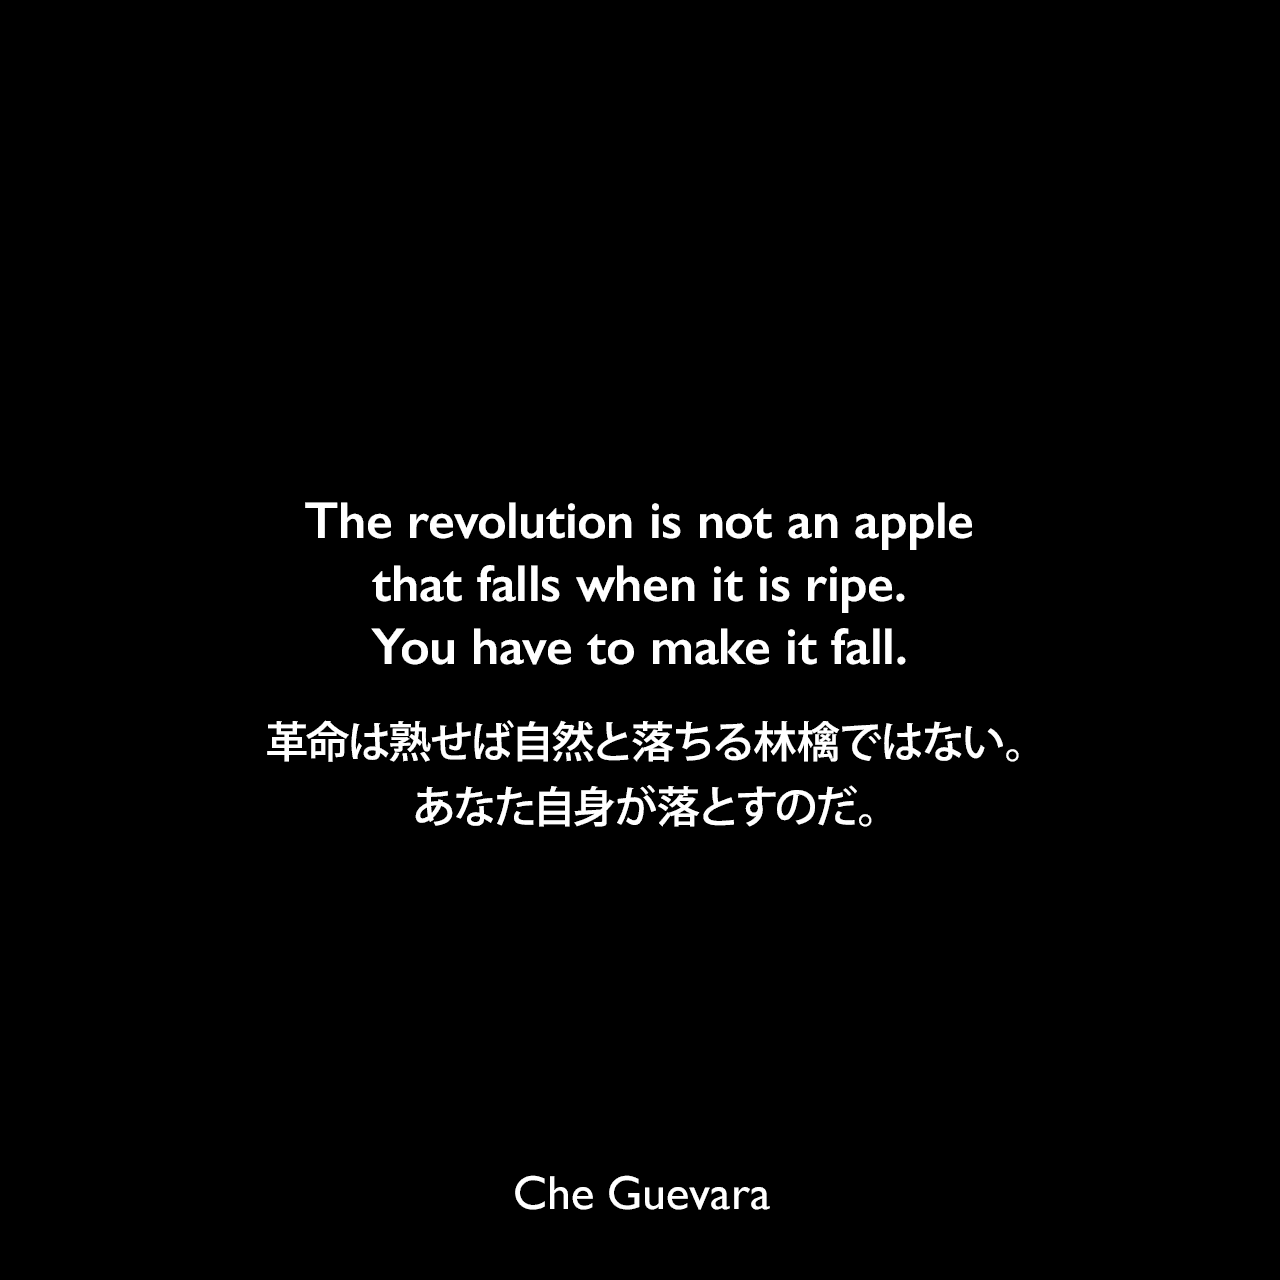 The revolution is not an apple that falls when it is ripe. You have to make it fall.革命は熟せば自然と落ちる林檎ではない。あなた自身が落とすのだ。- チェ・ゲバラによる本「Che Guevara Speaks: Selected Speeches and Writings」より